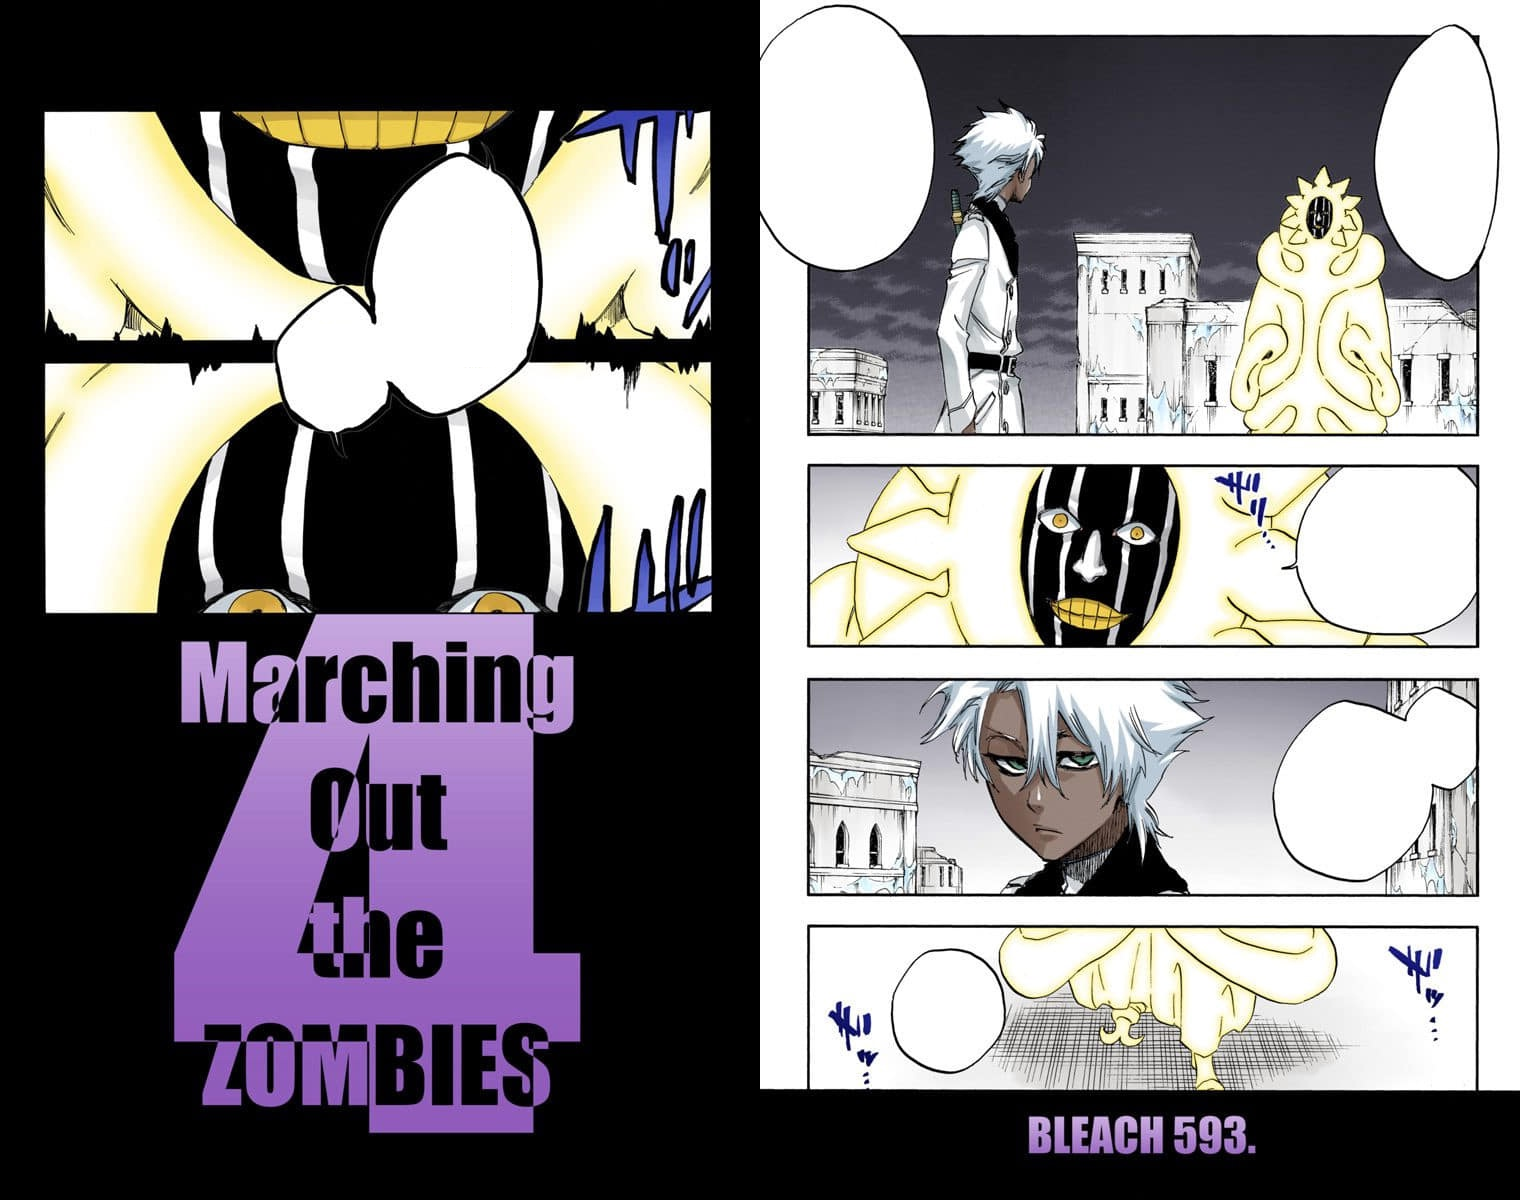 Bleach TYBW Episode 22 Marching Out the Zombies Breakdown!! 